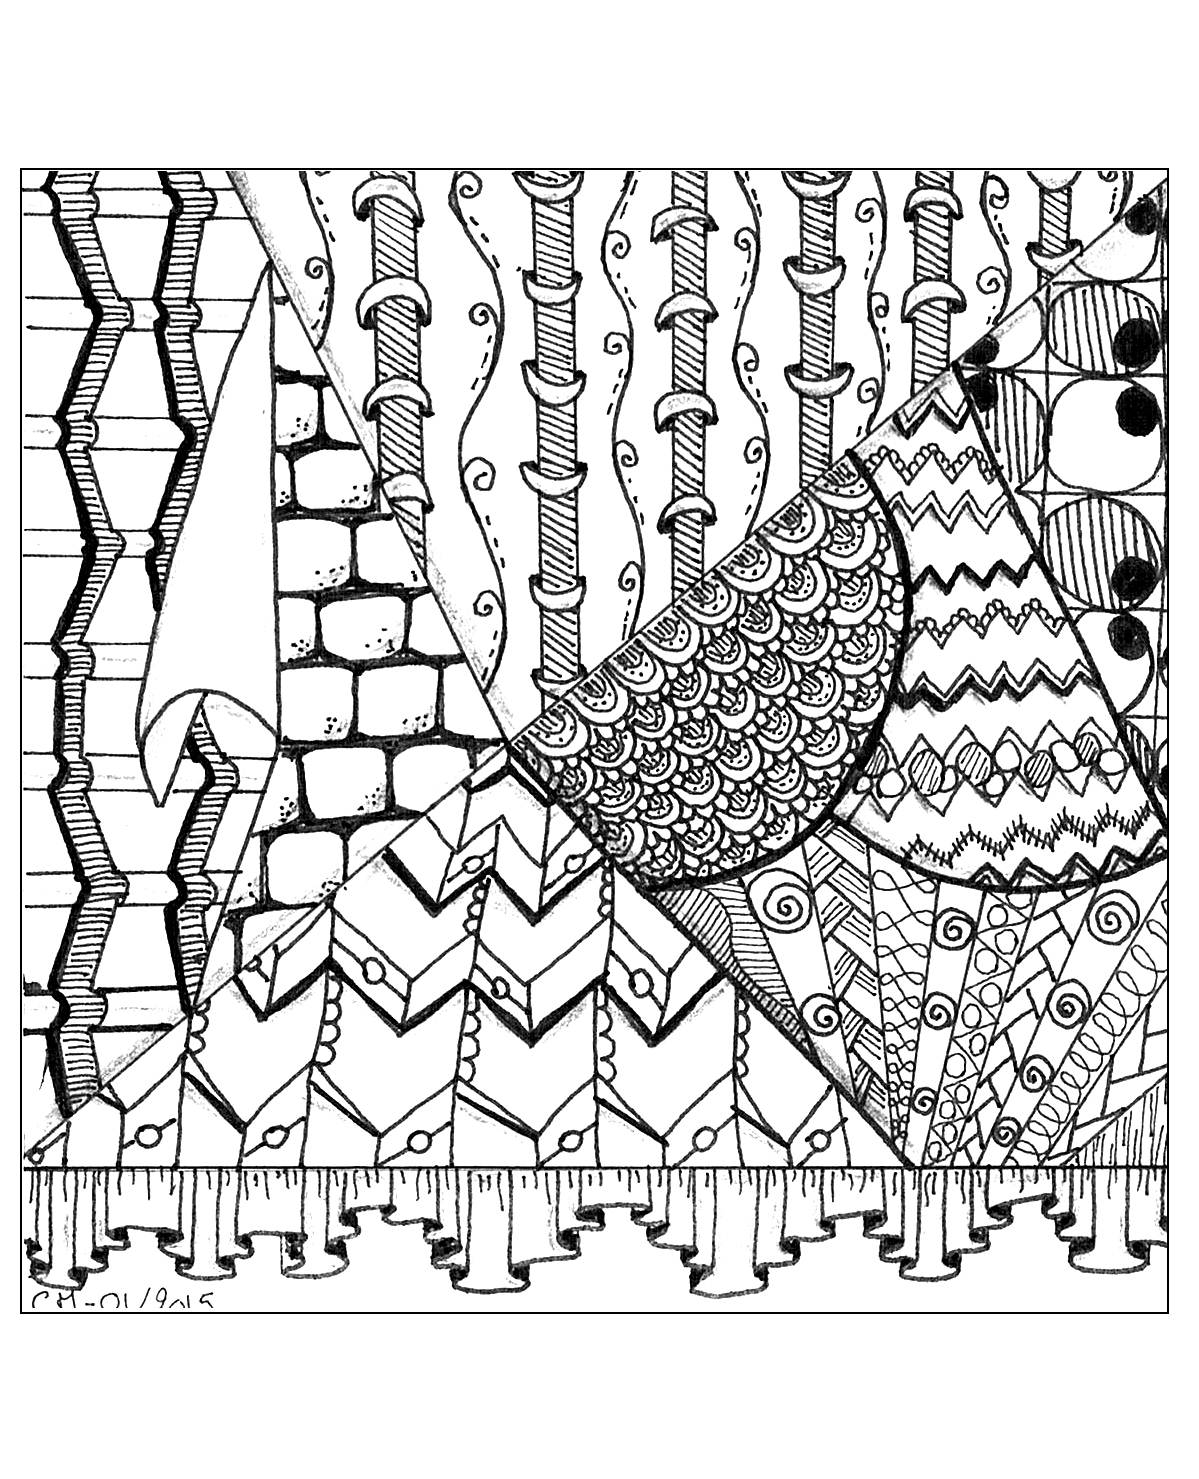 Zentangle coloring page, to color, by Cathy M